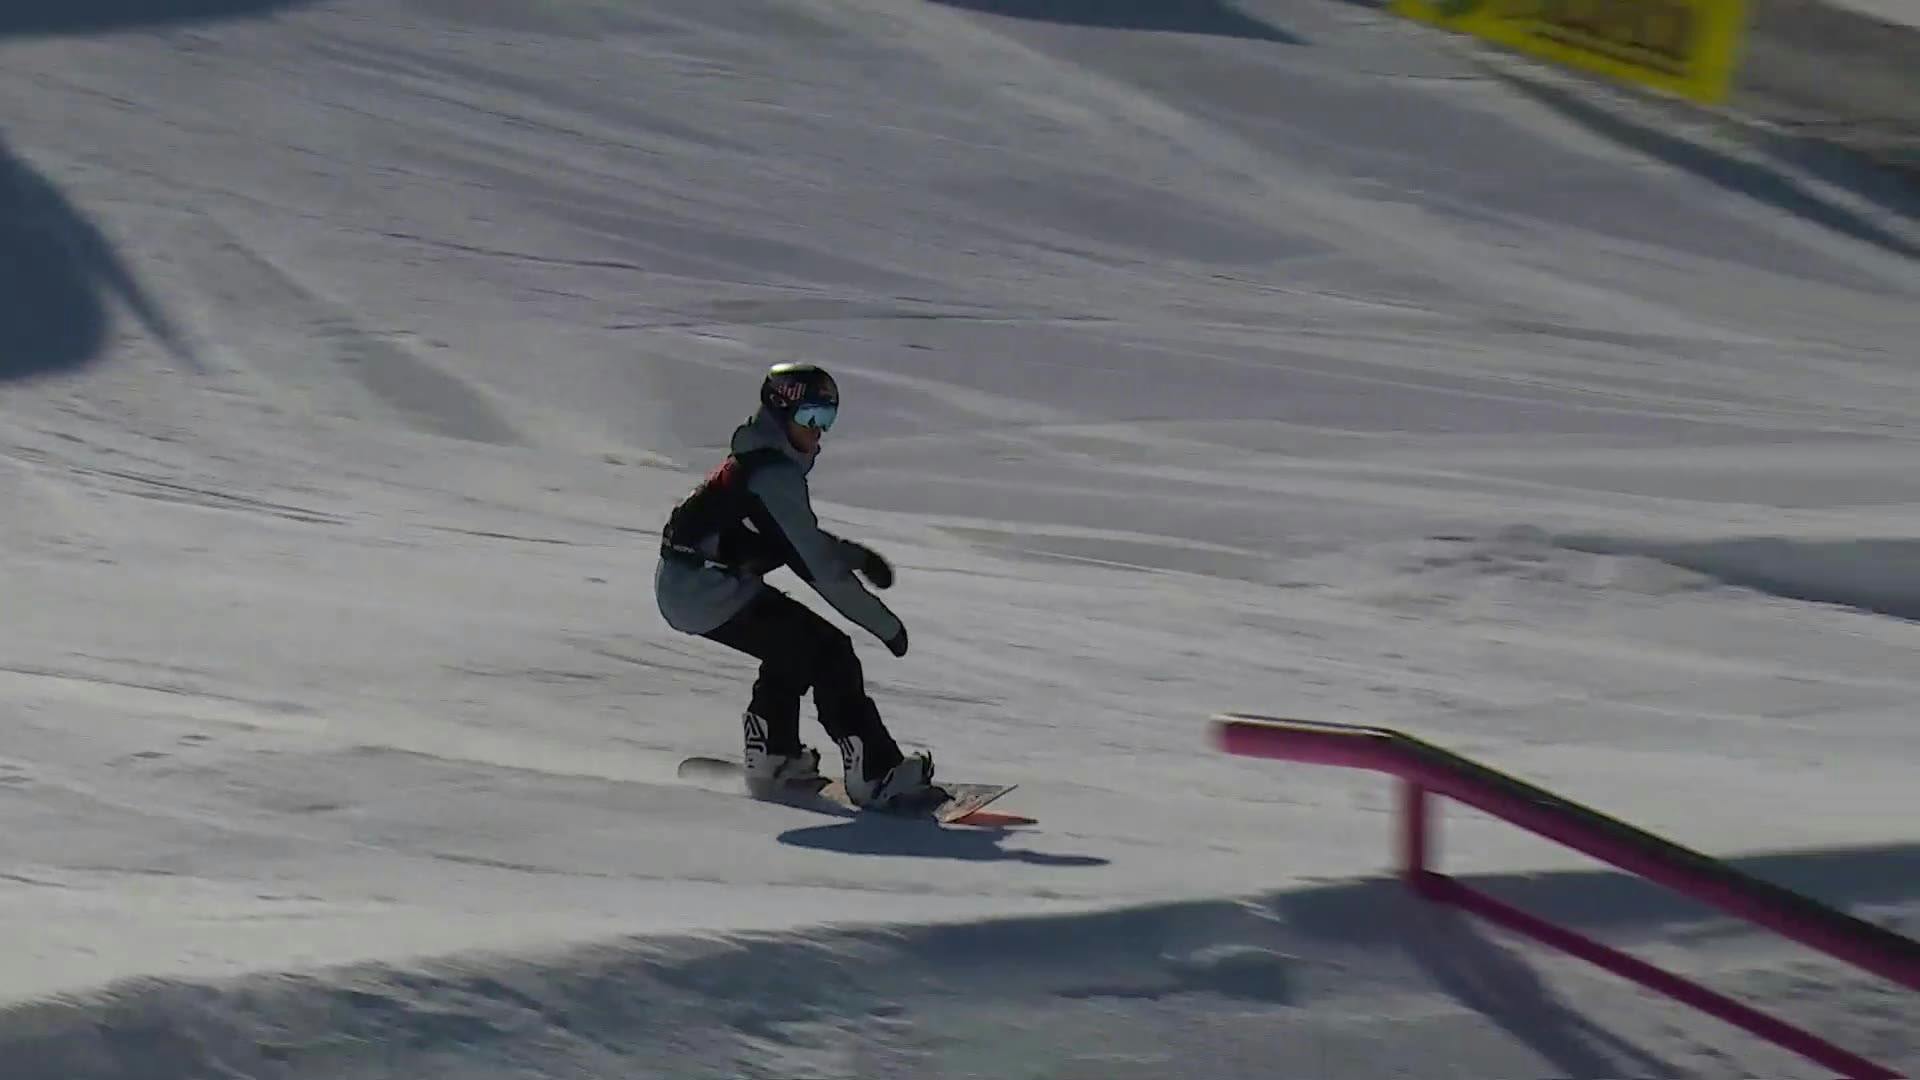 Toyota U.S. Grand Prix Mammoth Mountain Men's Snowboard Slopestyle Qualifiers | USSS Event Replays